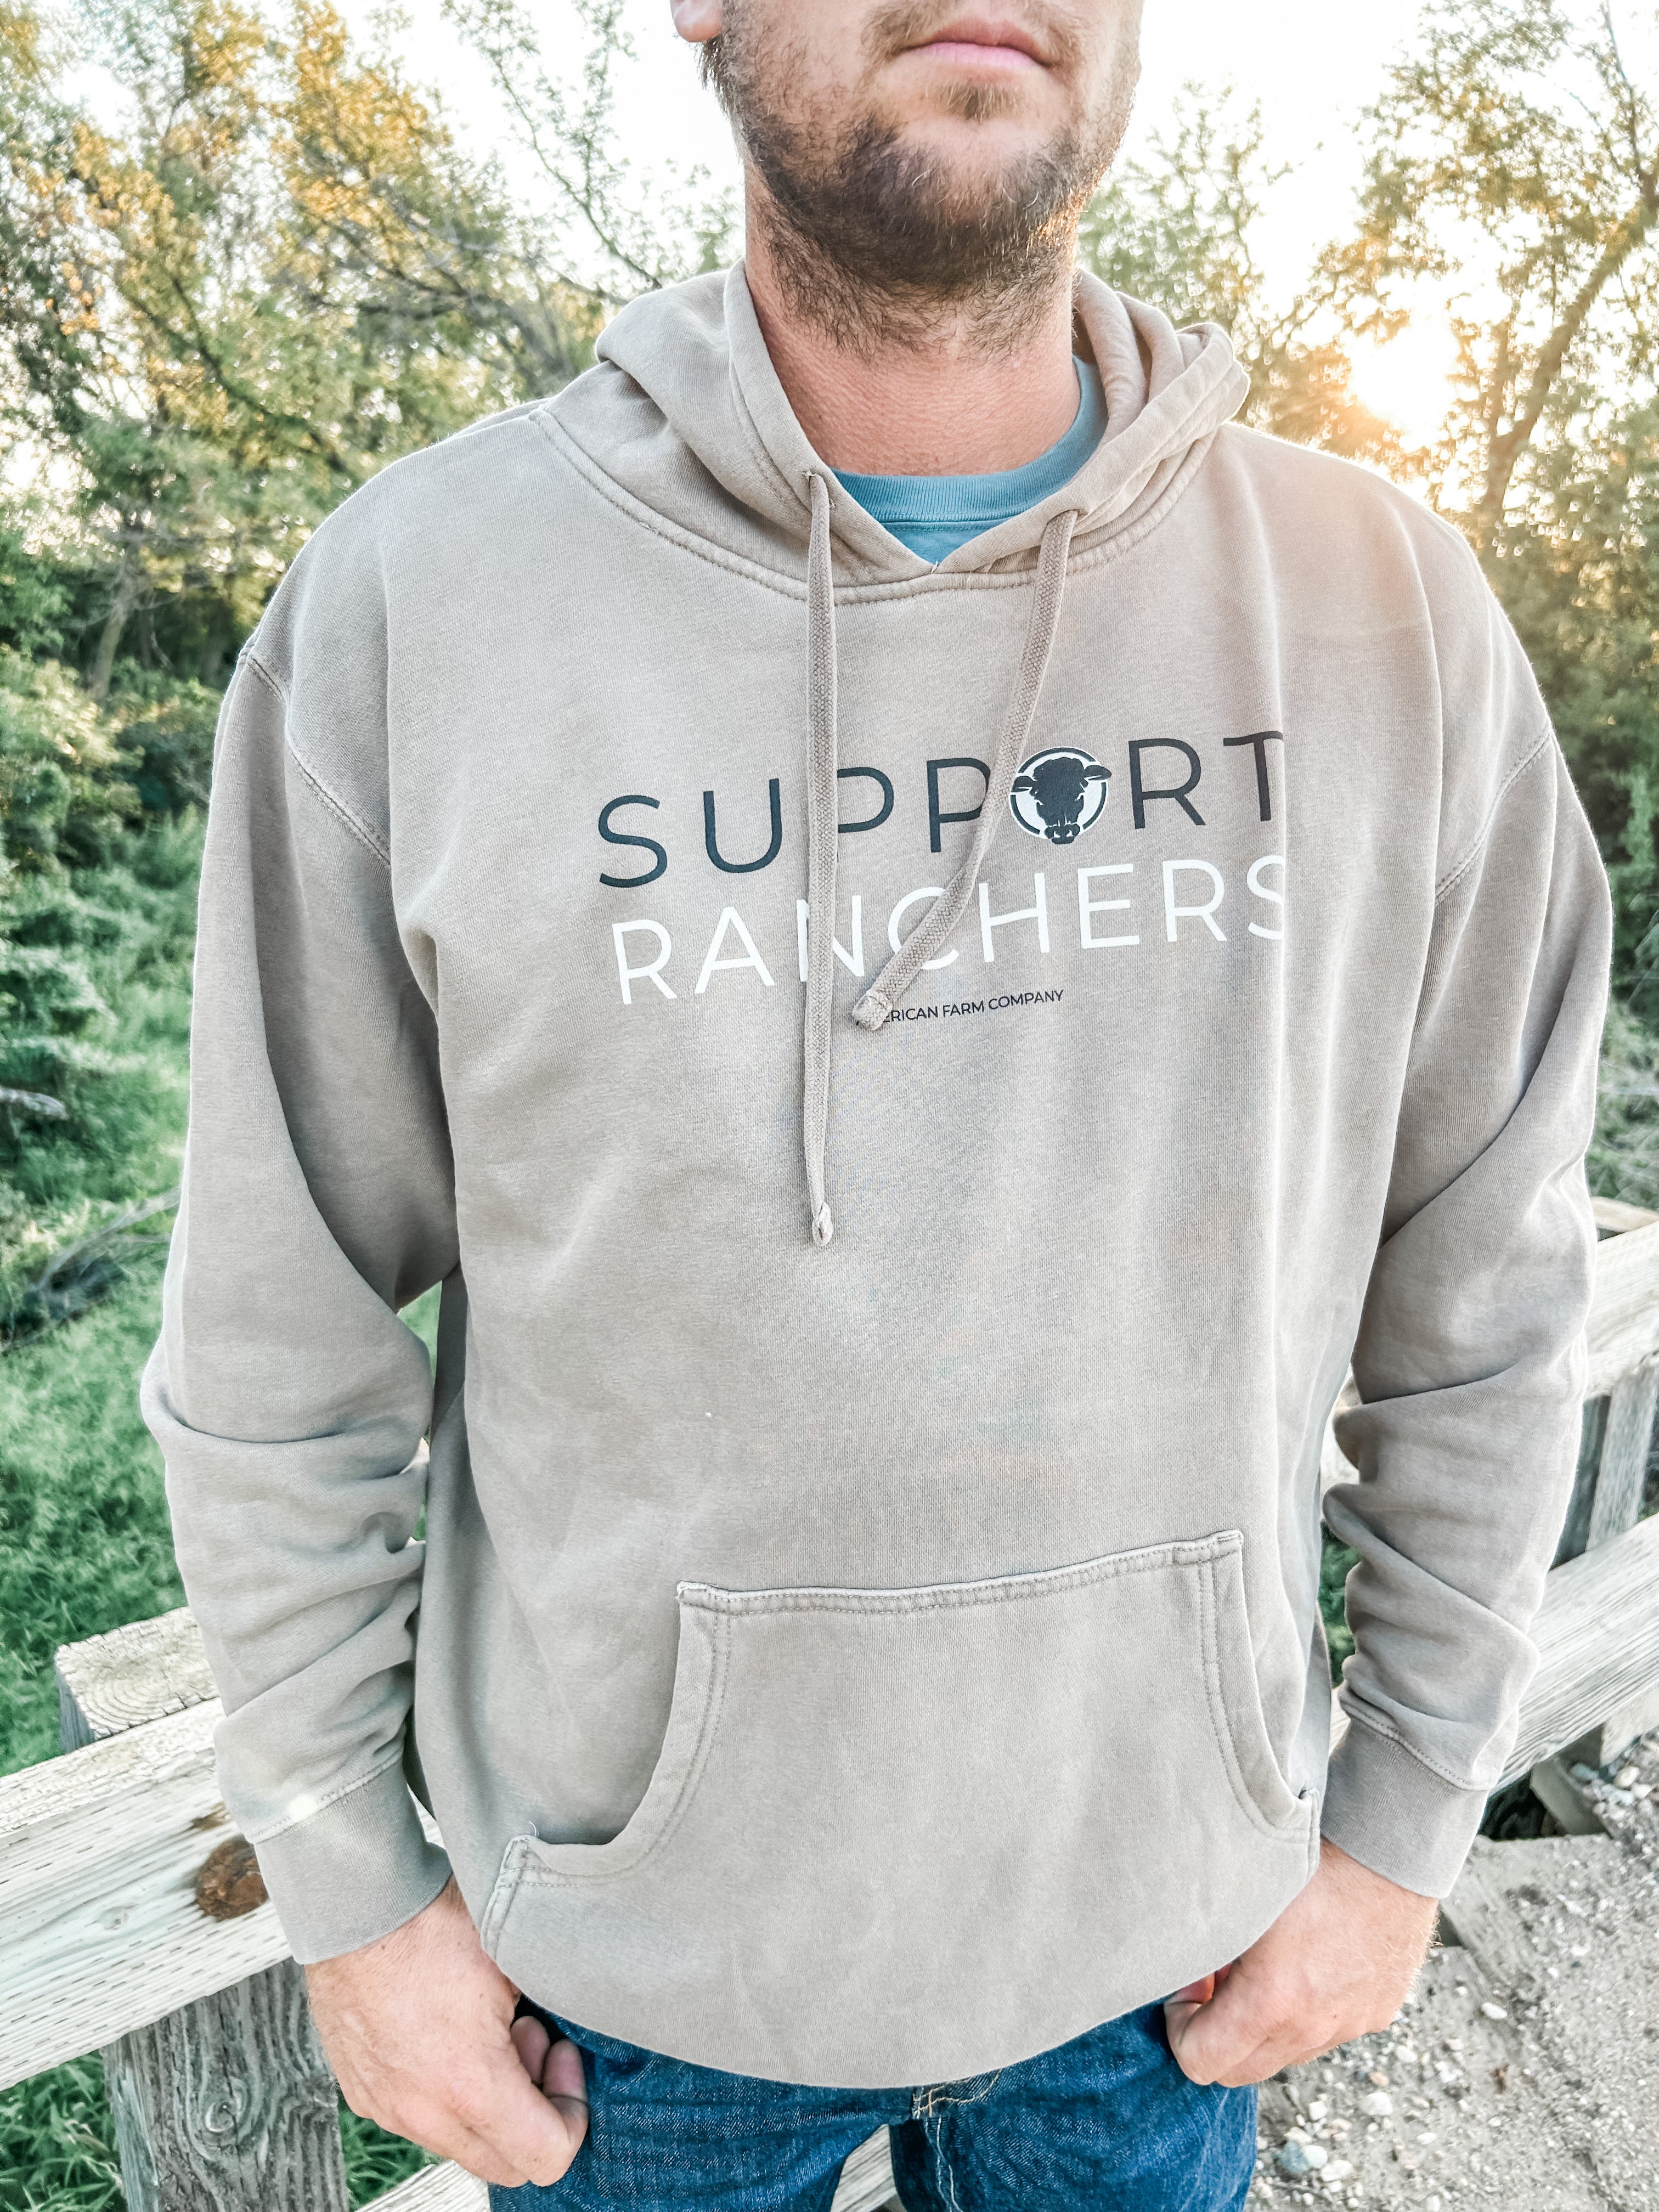 'Support Ranchers’ Skull Hoodie